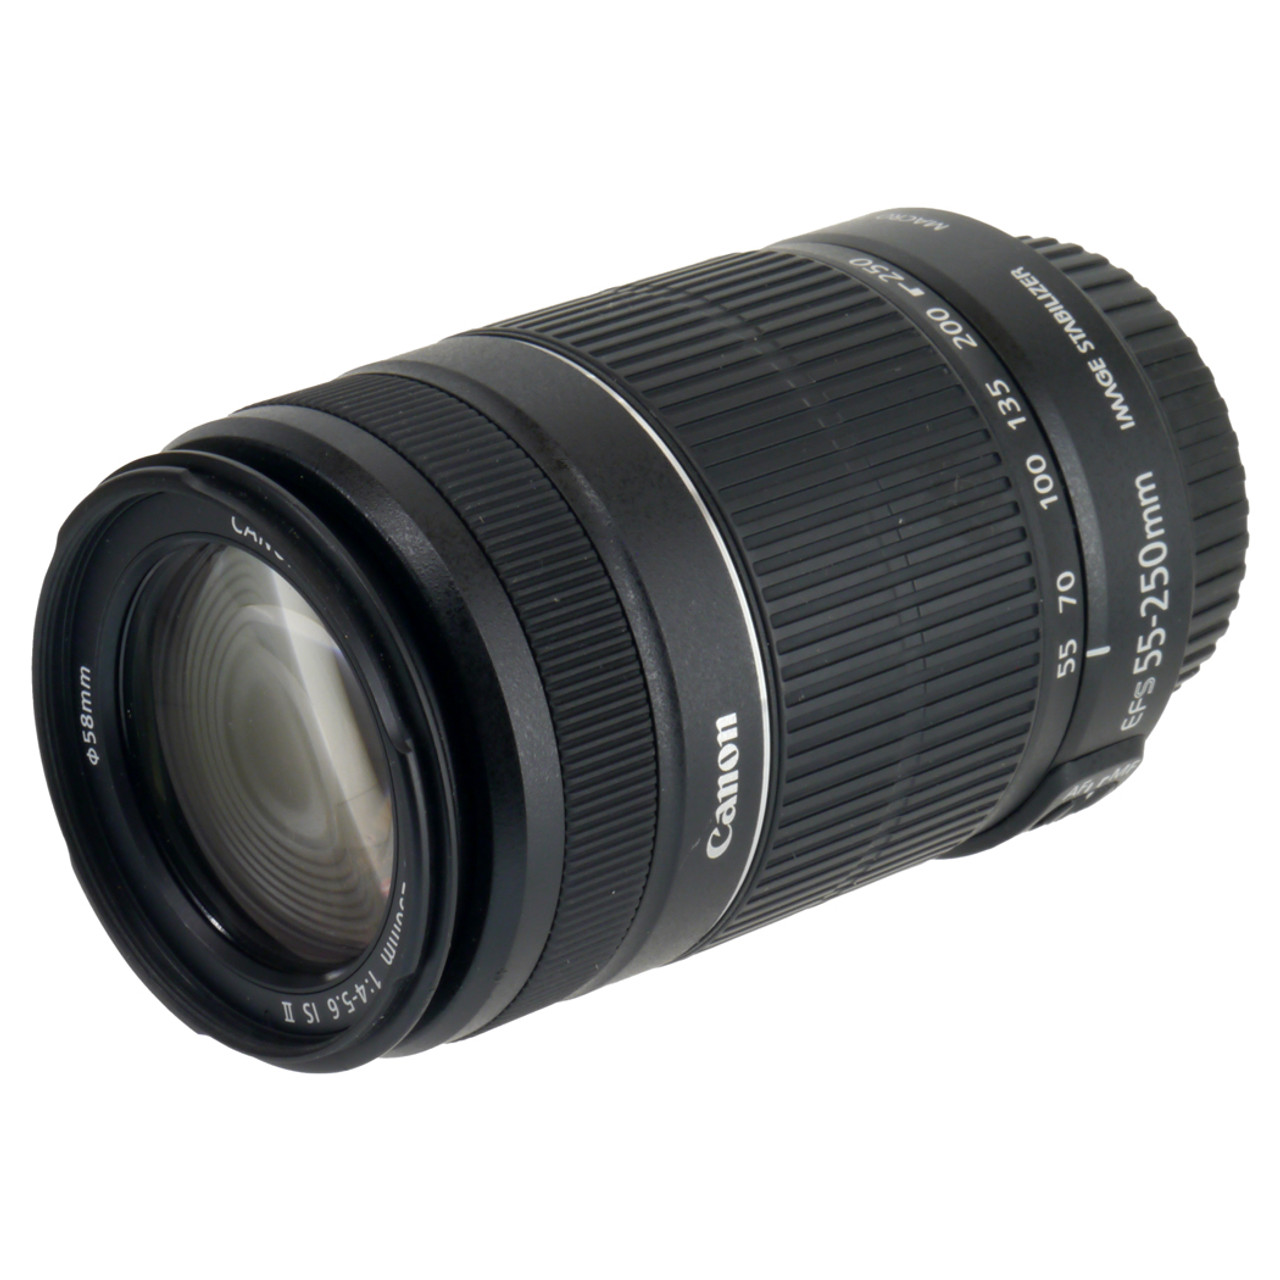 USED CANON EF-S 55-250MM F4-5.6 IS